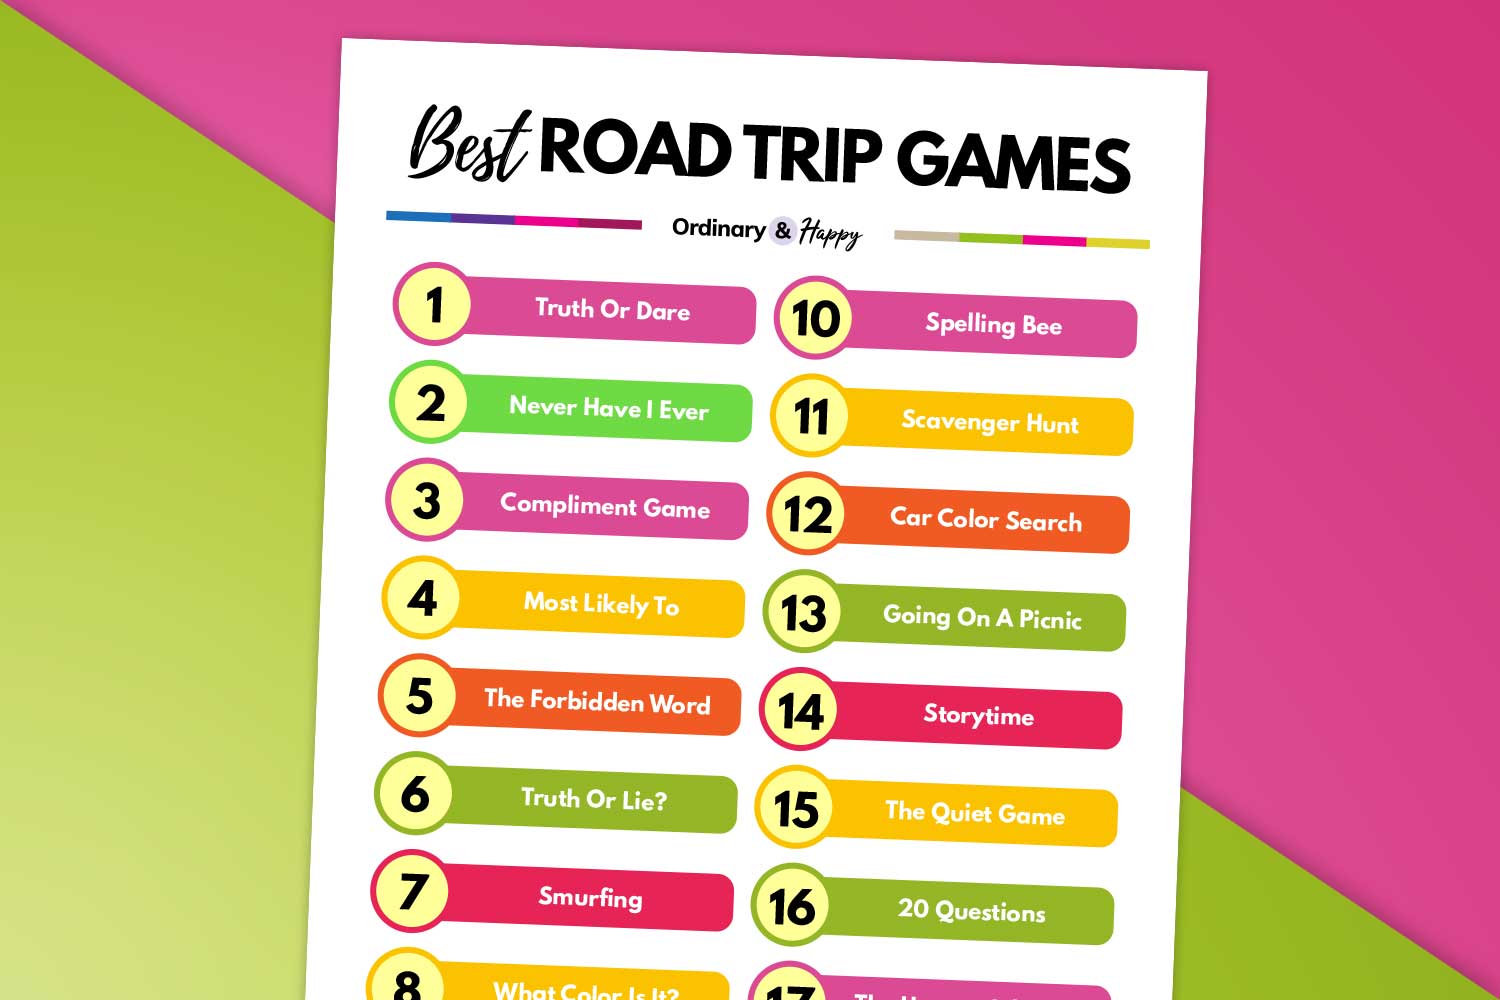 Road trip games (list from the article)